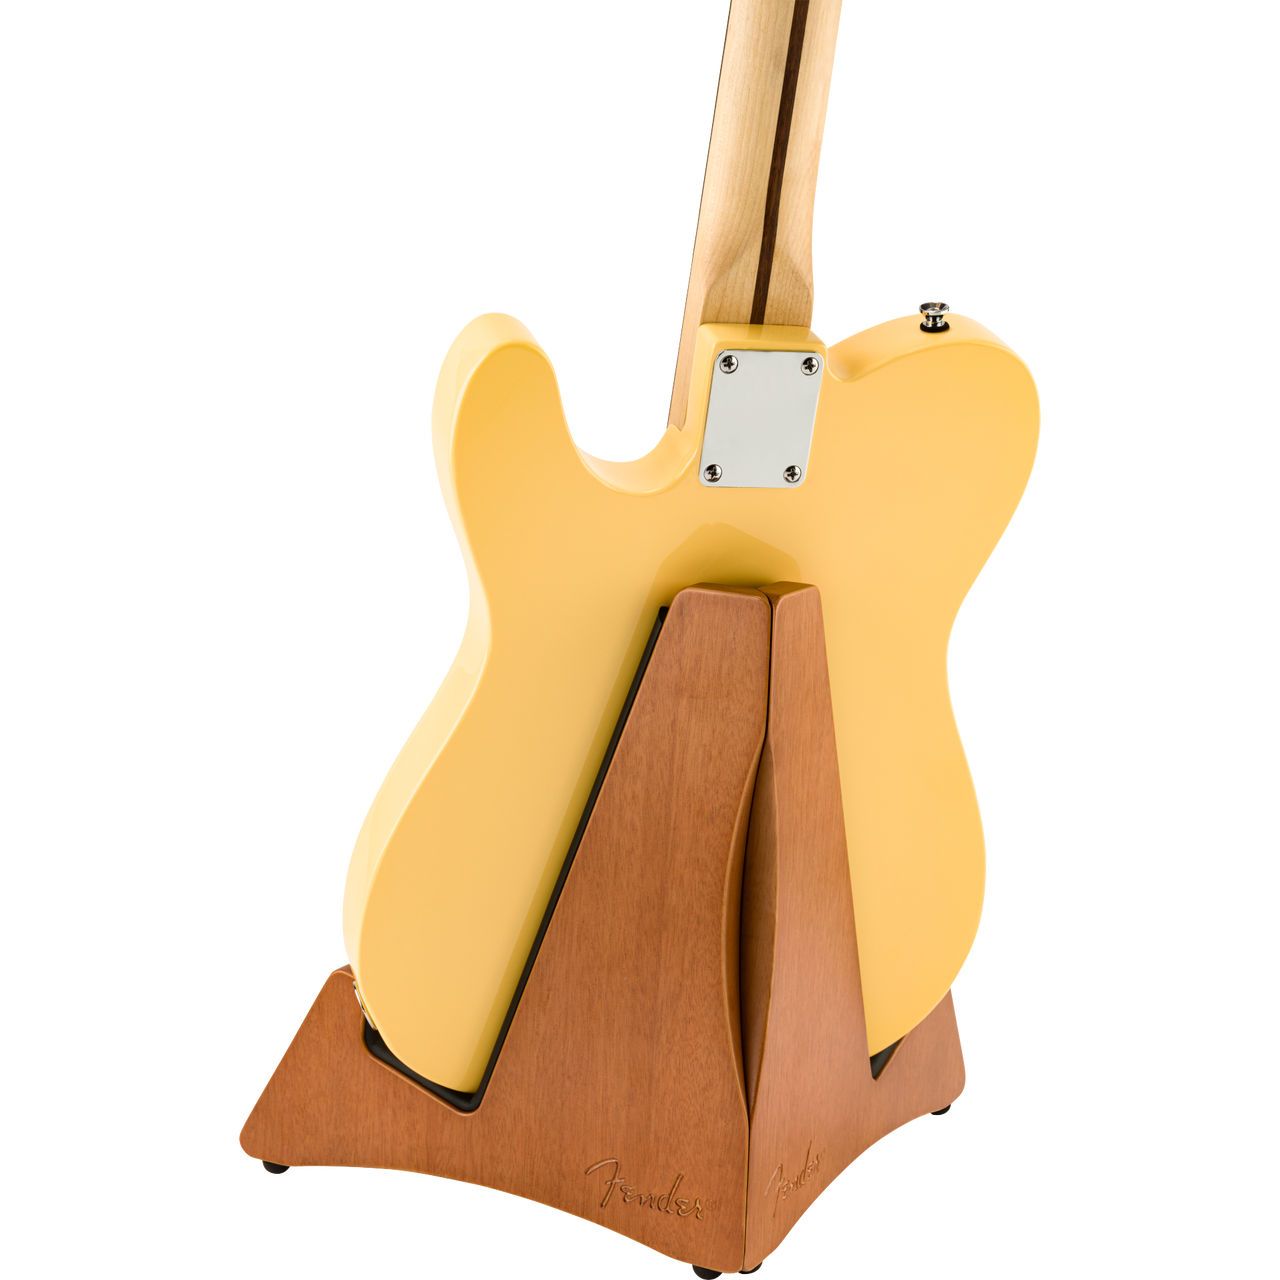 Fender Timberframe Electric Guitar Stand - Natural - Acoustic Centre